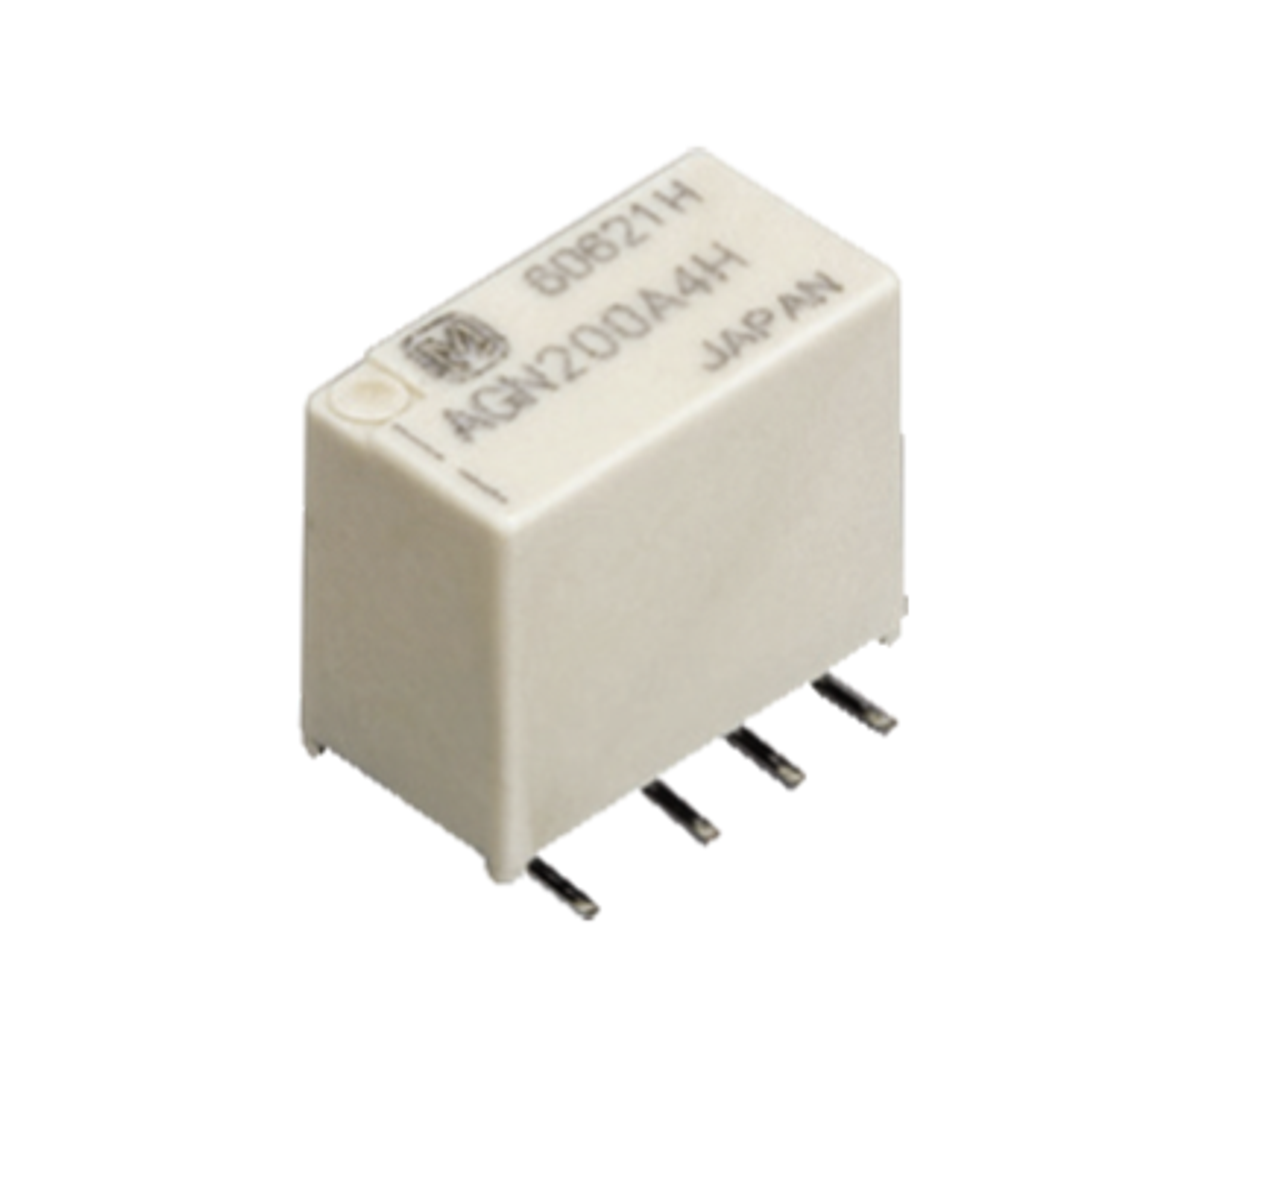 Panasonic Electric Works AGN210A09Z Signal Relays